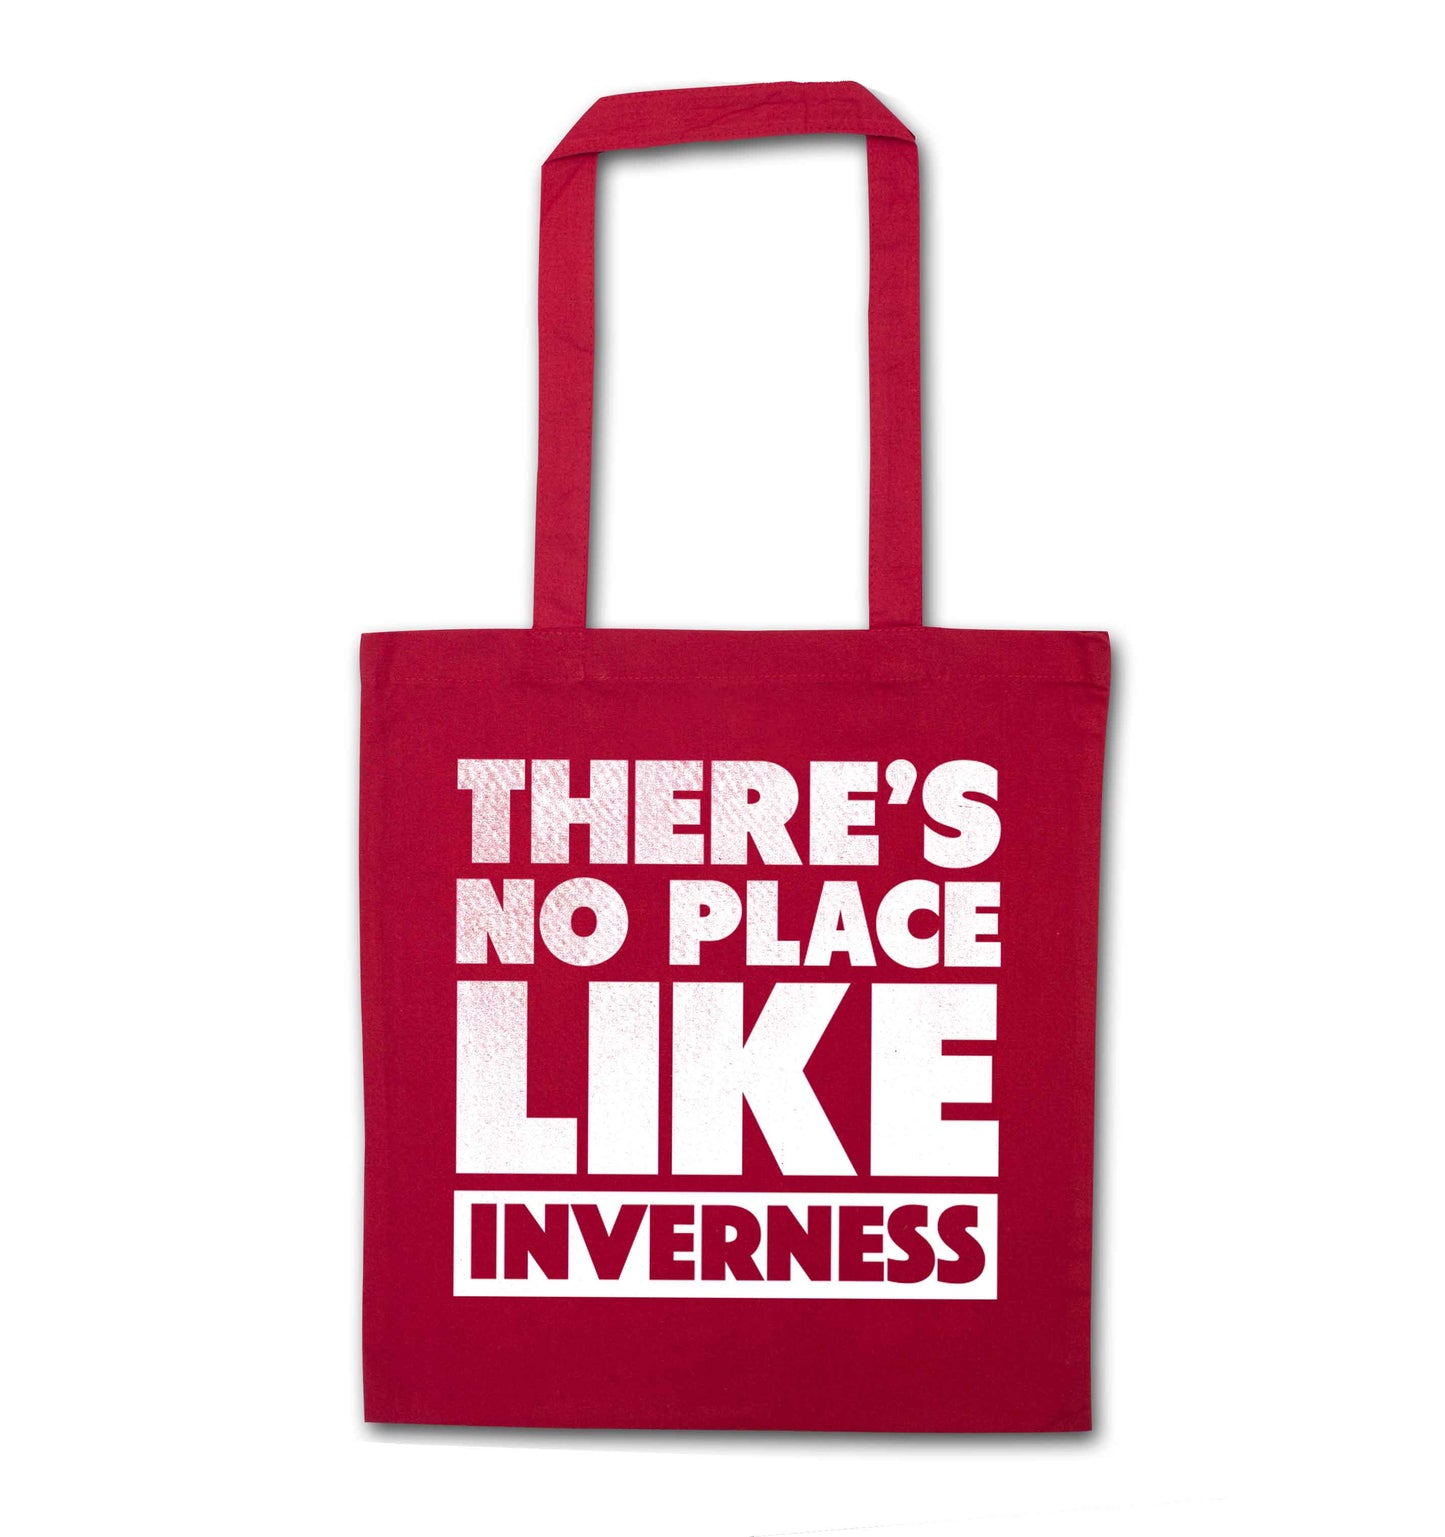 There's no place like Inverness red tote bag